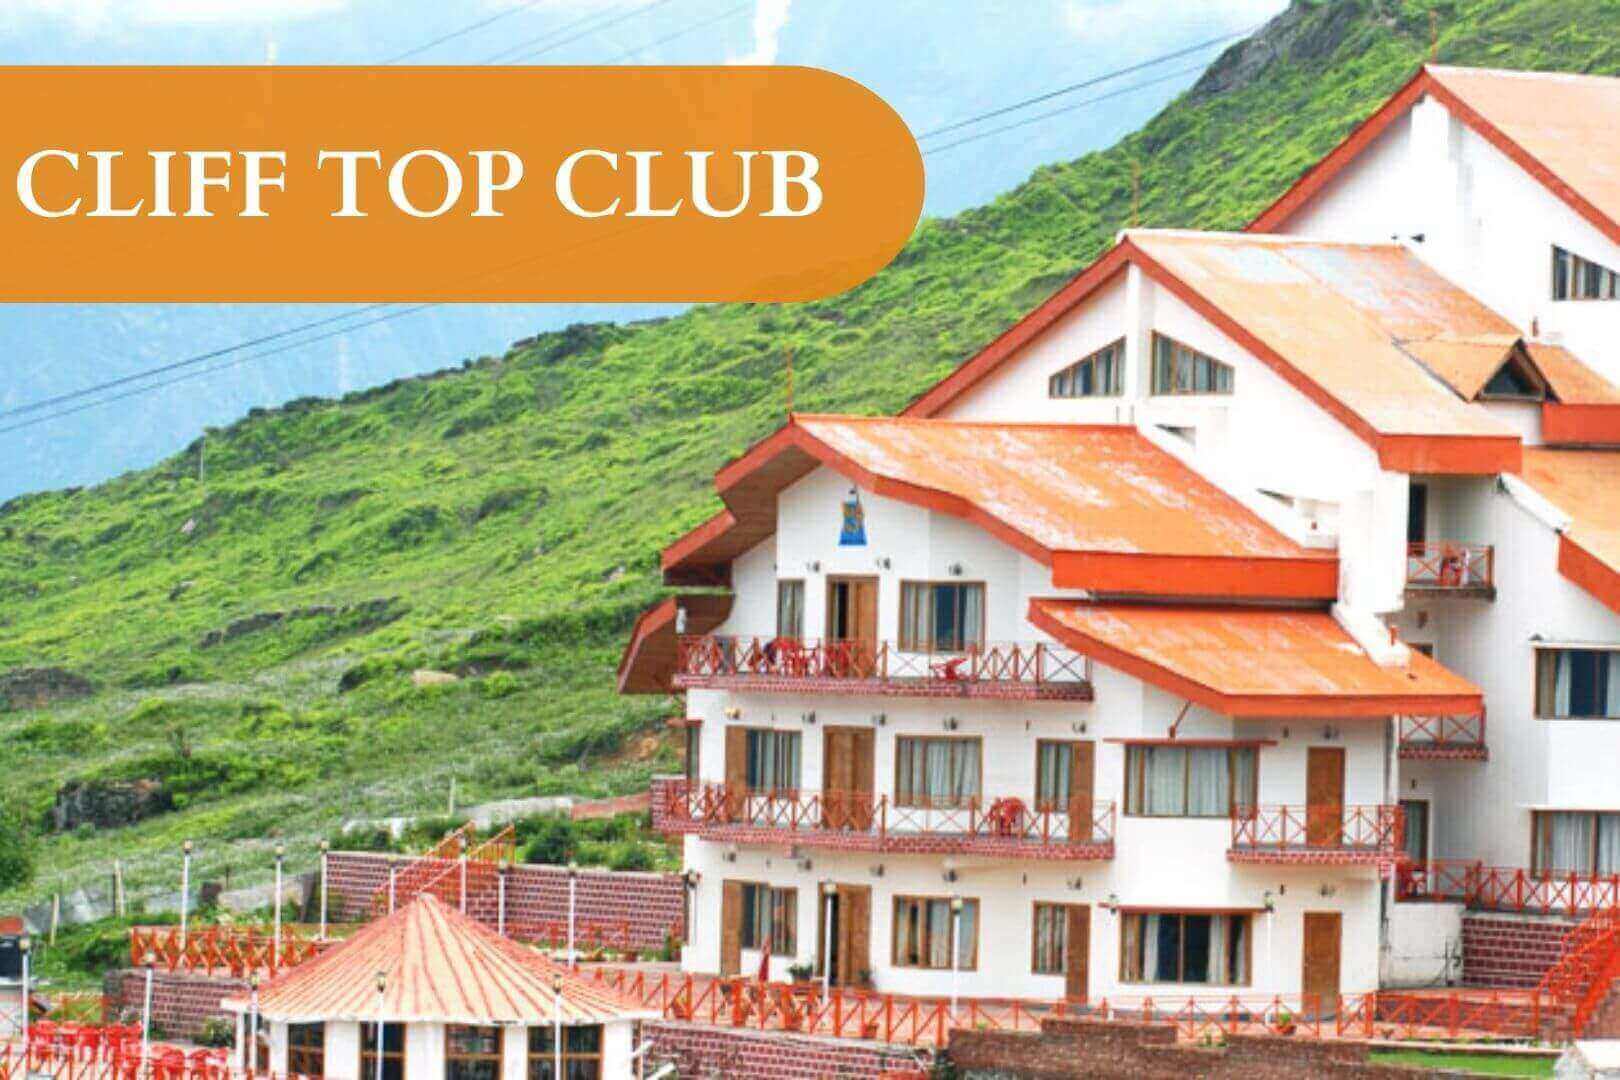 CLIFF TOP CLUB, auli ski resort, skiing price in india, skiing packages in india, best ski resorts in india, gulmarg ski resort, ski resort manali, skiing in sikkim, luxury snow resorts india, ski resorts in india, indian ski resorts, best ski resorts in india, ski resorts india, skiing india, ski resort in india, ski resort india, skiing in india, india ski resorts, best place for skiing in india, best place to ski in india, best places to ski in india, best skiing places in india, ski india, ice skiing in india, skiing resort in india, solang ski resort, india ski resort, skiing resorts in india, ski resorts in the himalayas, skiing destinations in india, snow resorts in india, india skiing, try ski, best ski resort in india, skiing places in india, ski in india, snow skating in india, mountain resort in india, fagu ski resort, sking in india, best mountain resorts in india, ski resort himalayas, best places for skiing in india, snow view mountain resort, snow valley hotels, best places to ski, indian ski, ski places in india, best winter resorts in india, snow skiing in india, india ski, himalayan snow heights, ski resort manali, top snow resorts,